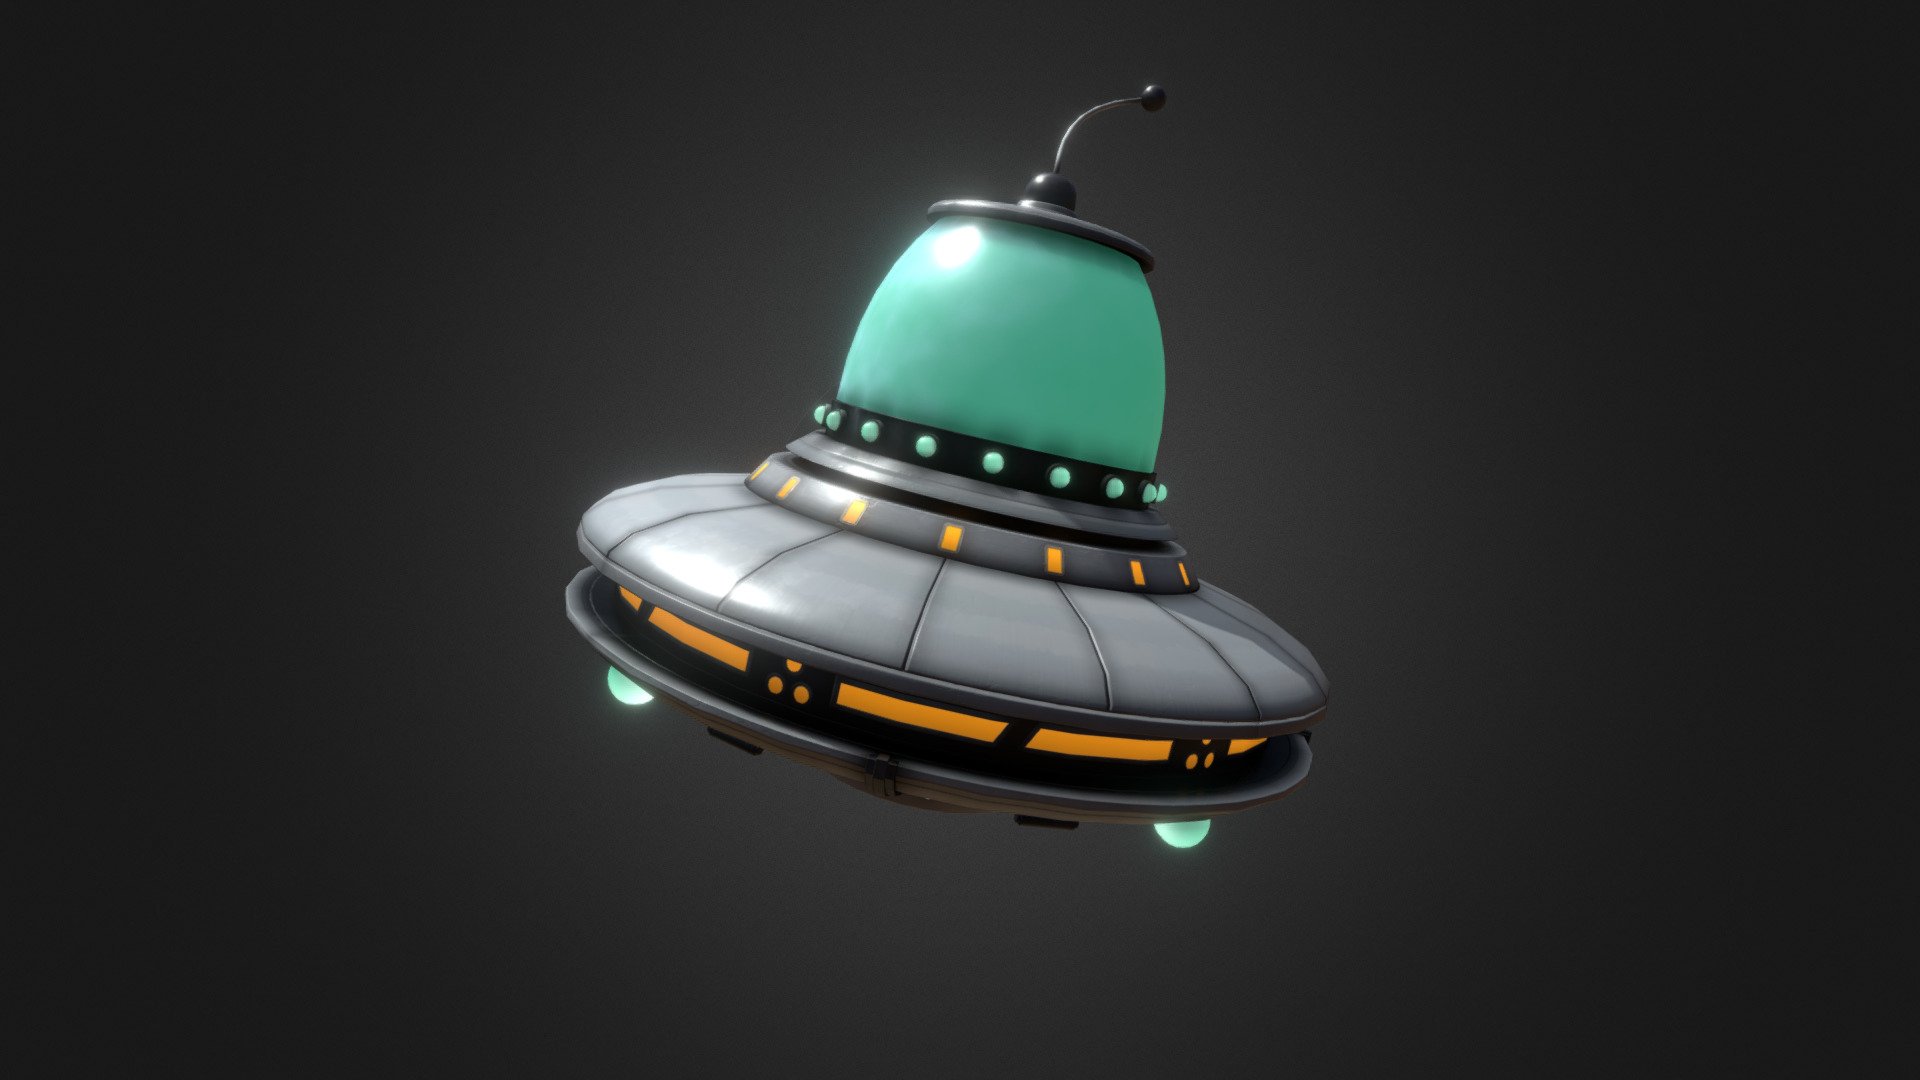 UFO made for a Game jam at my school.

Used Blender and Substance Painter to make it 3d model